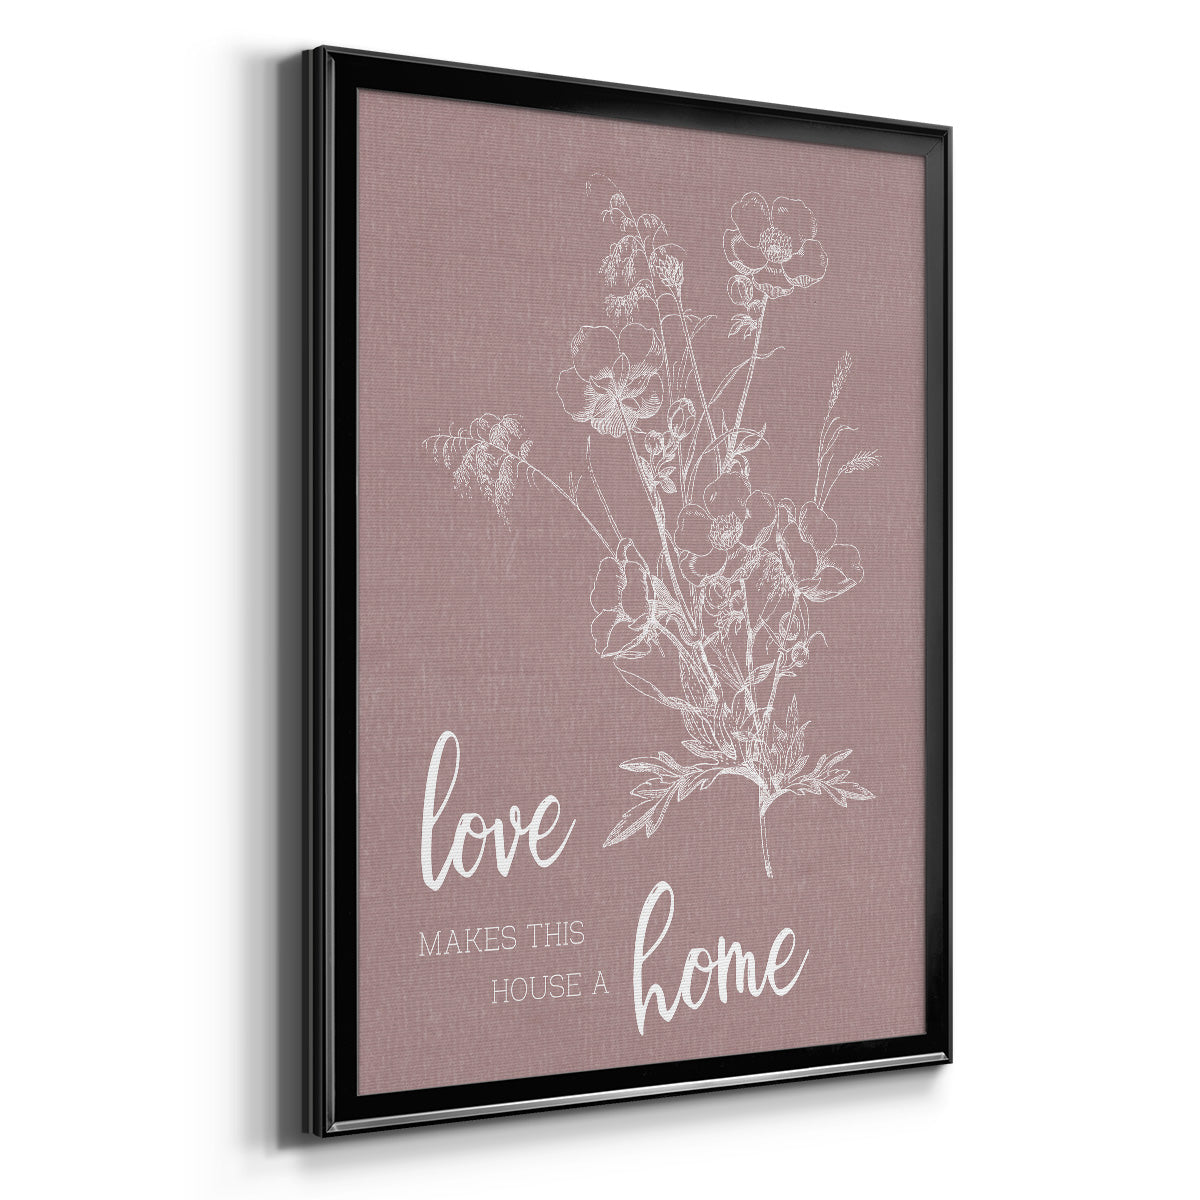 Love Home Premium Framed Print - Ready to Hang